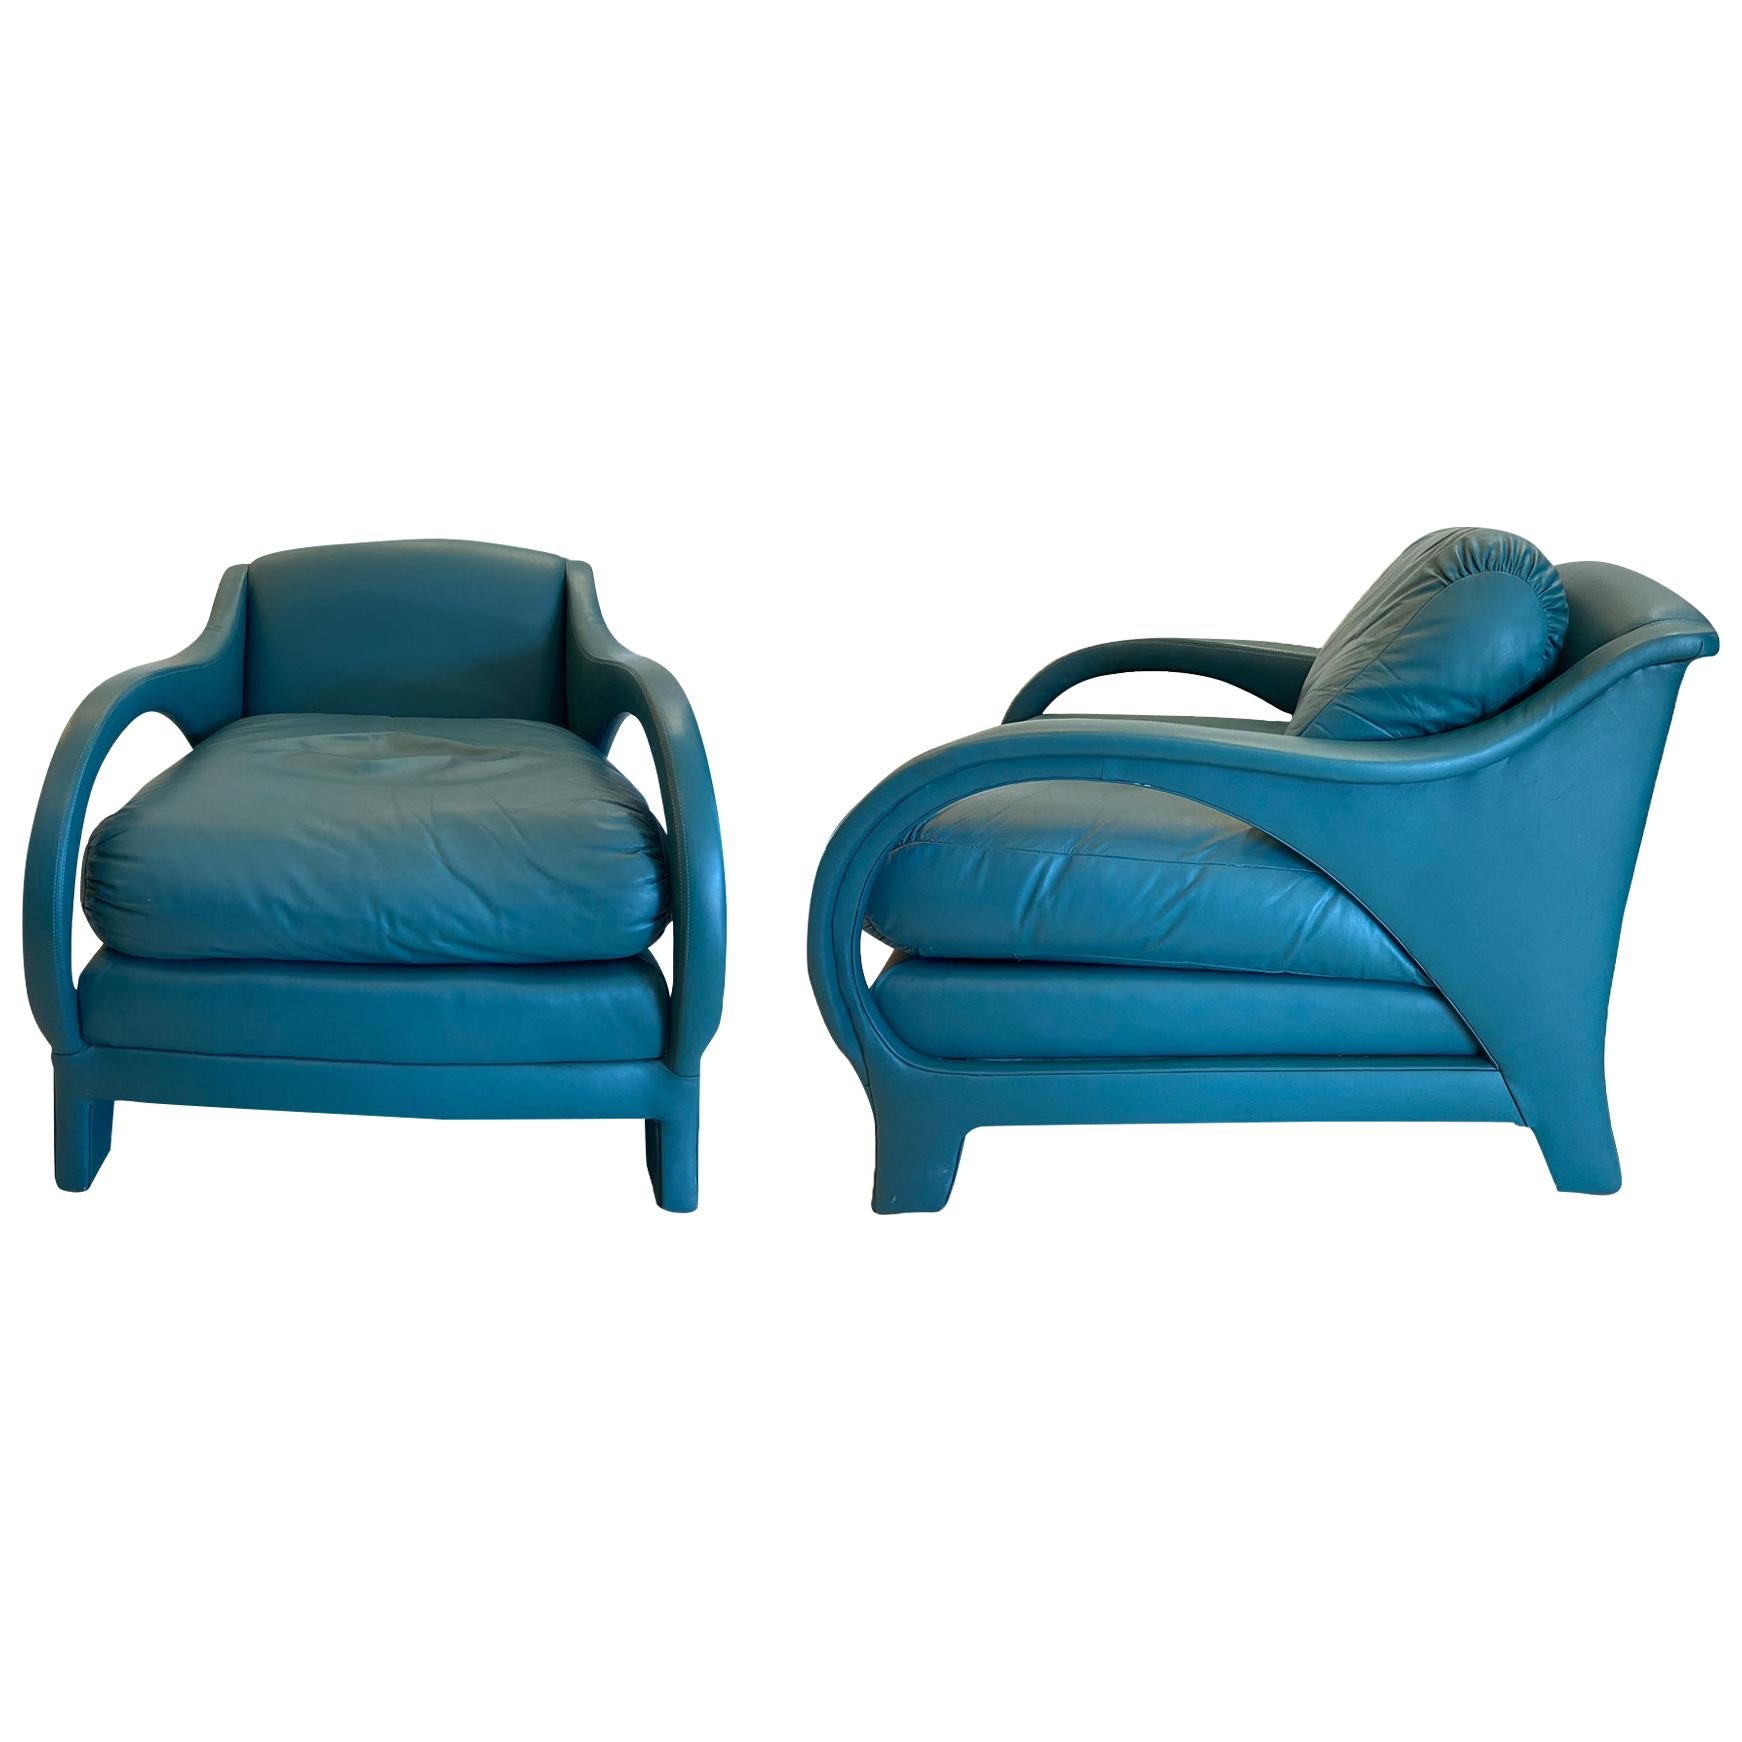 Jay Spectre Tycoon Leather Lounge Chairs a Pair